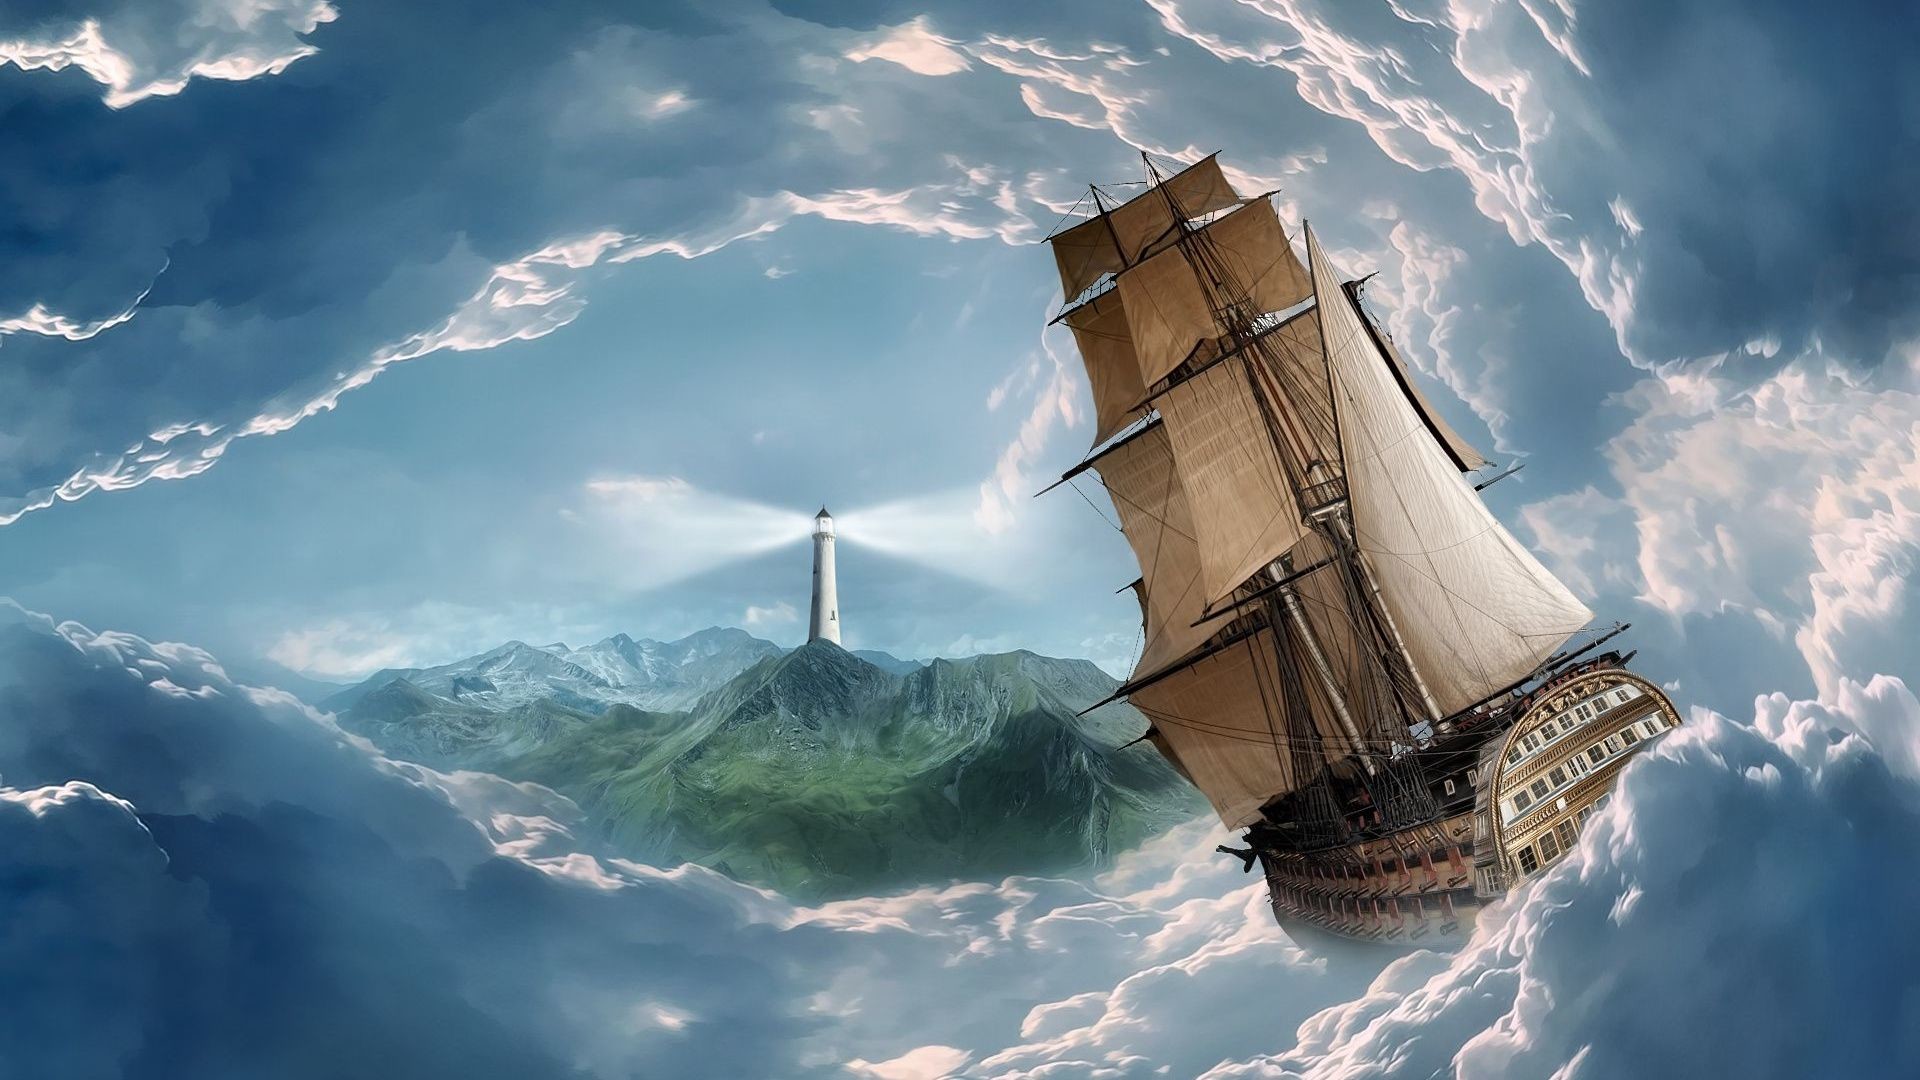 1920x1080 Ship Sailing In The Clouds HD Heavenly Wallpaper Free HD Wallpaper .